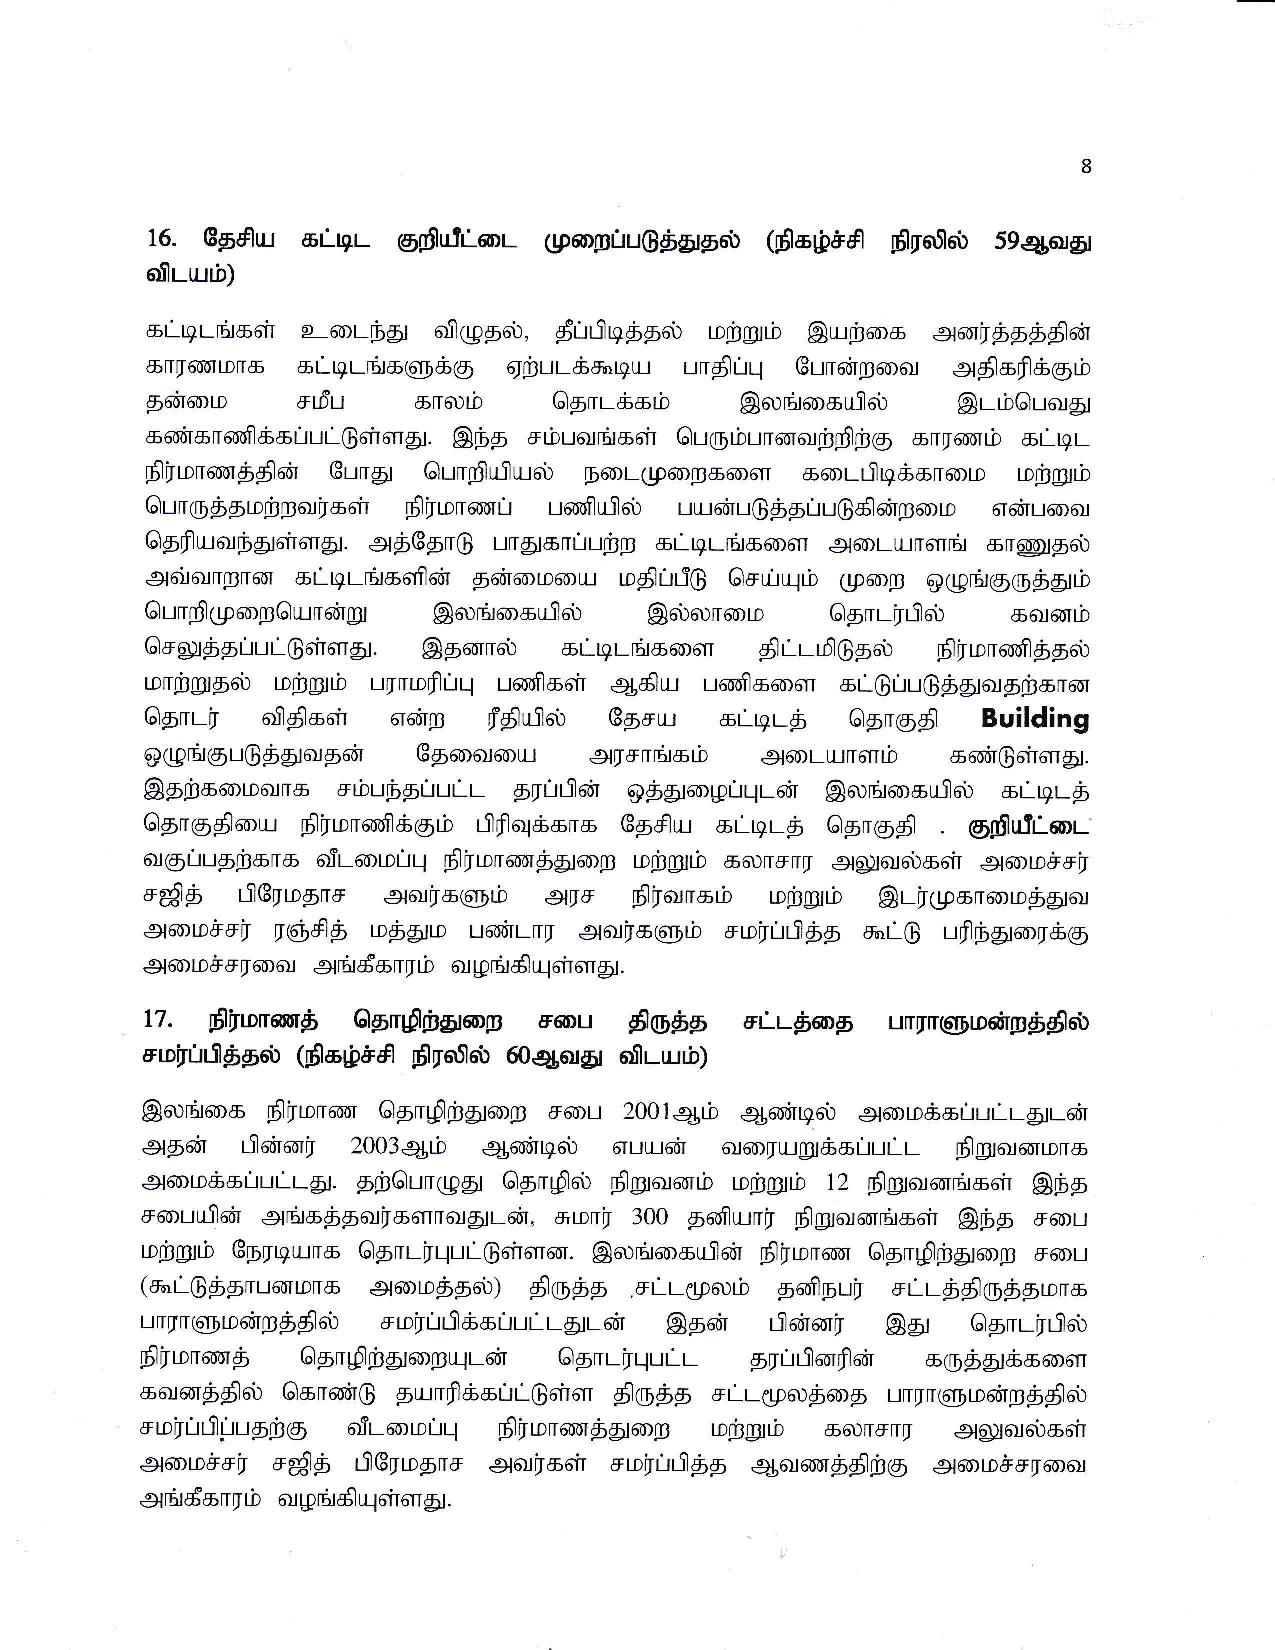 Cabinet Decision on 30.04.2019 T page 008